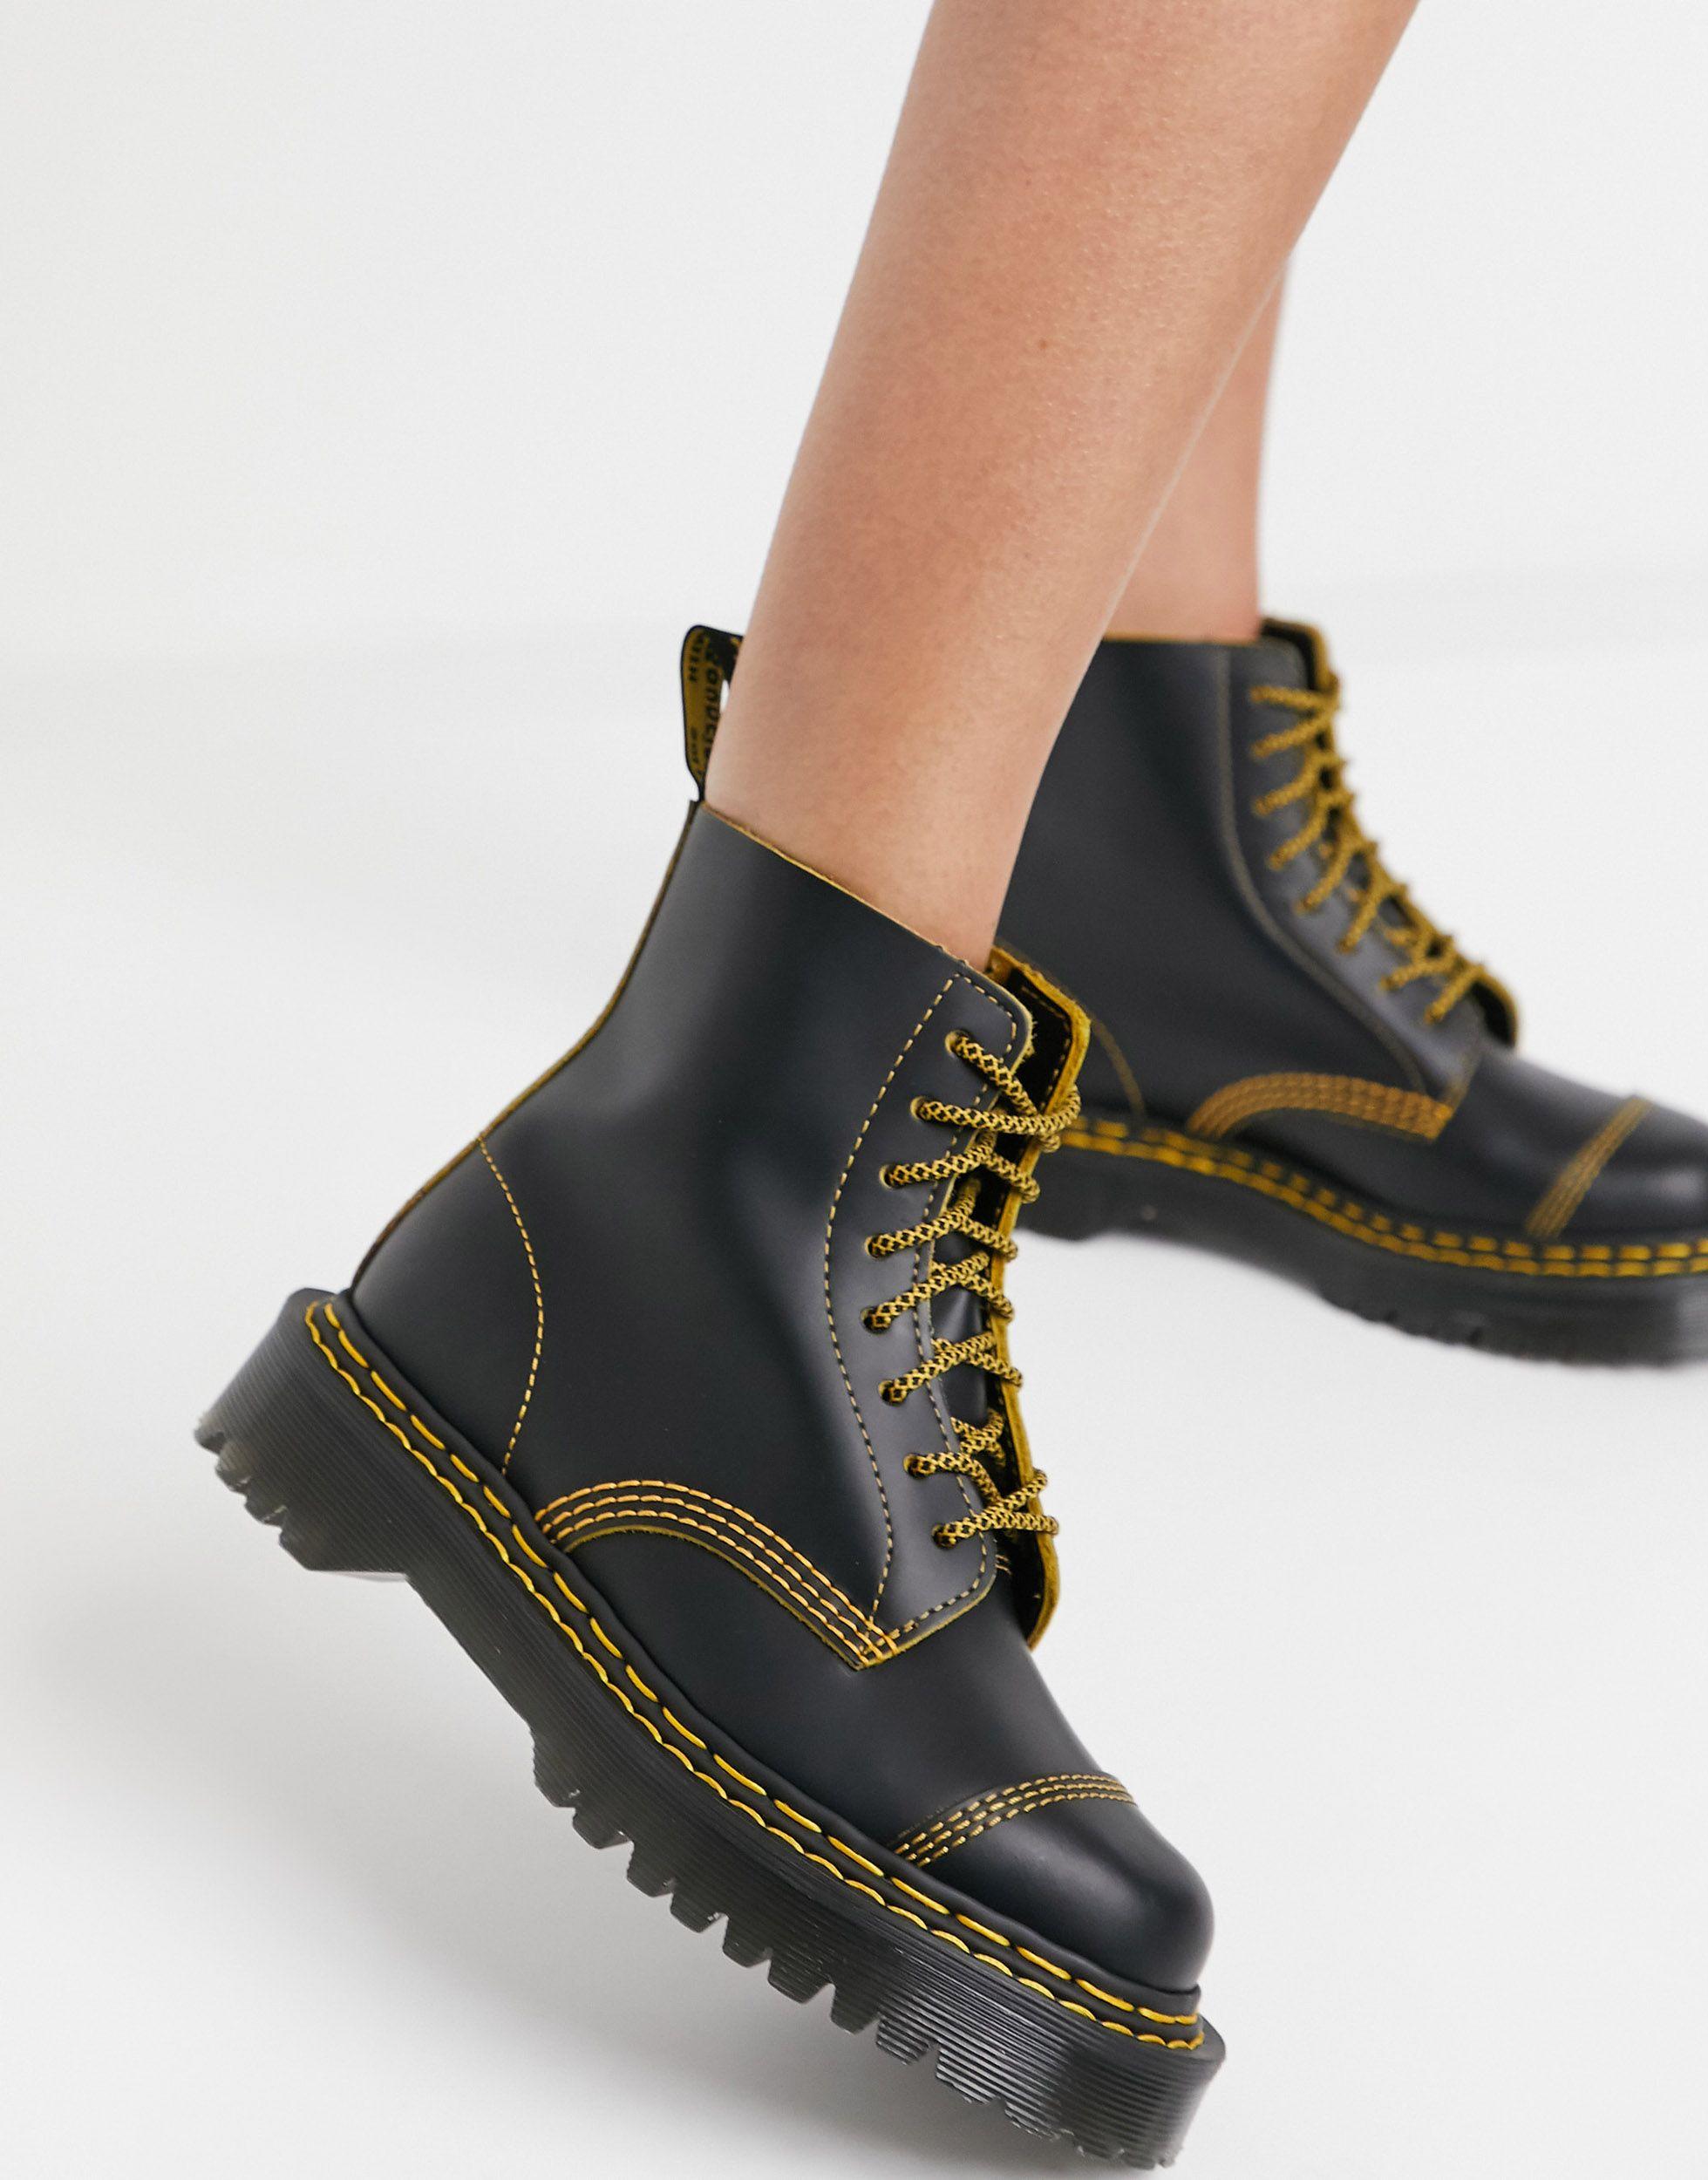 Dr. Martens 1460 Pascal Bex Double Stitch Boots in Black | Lyst